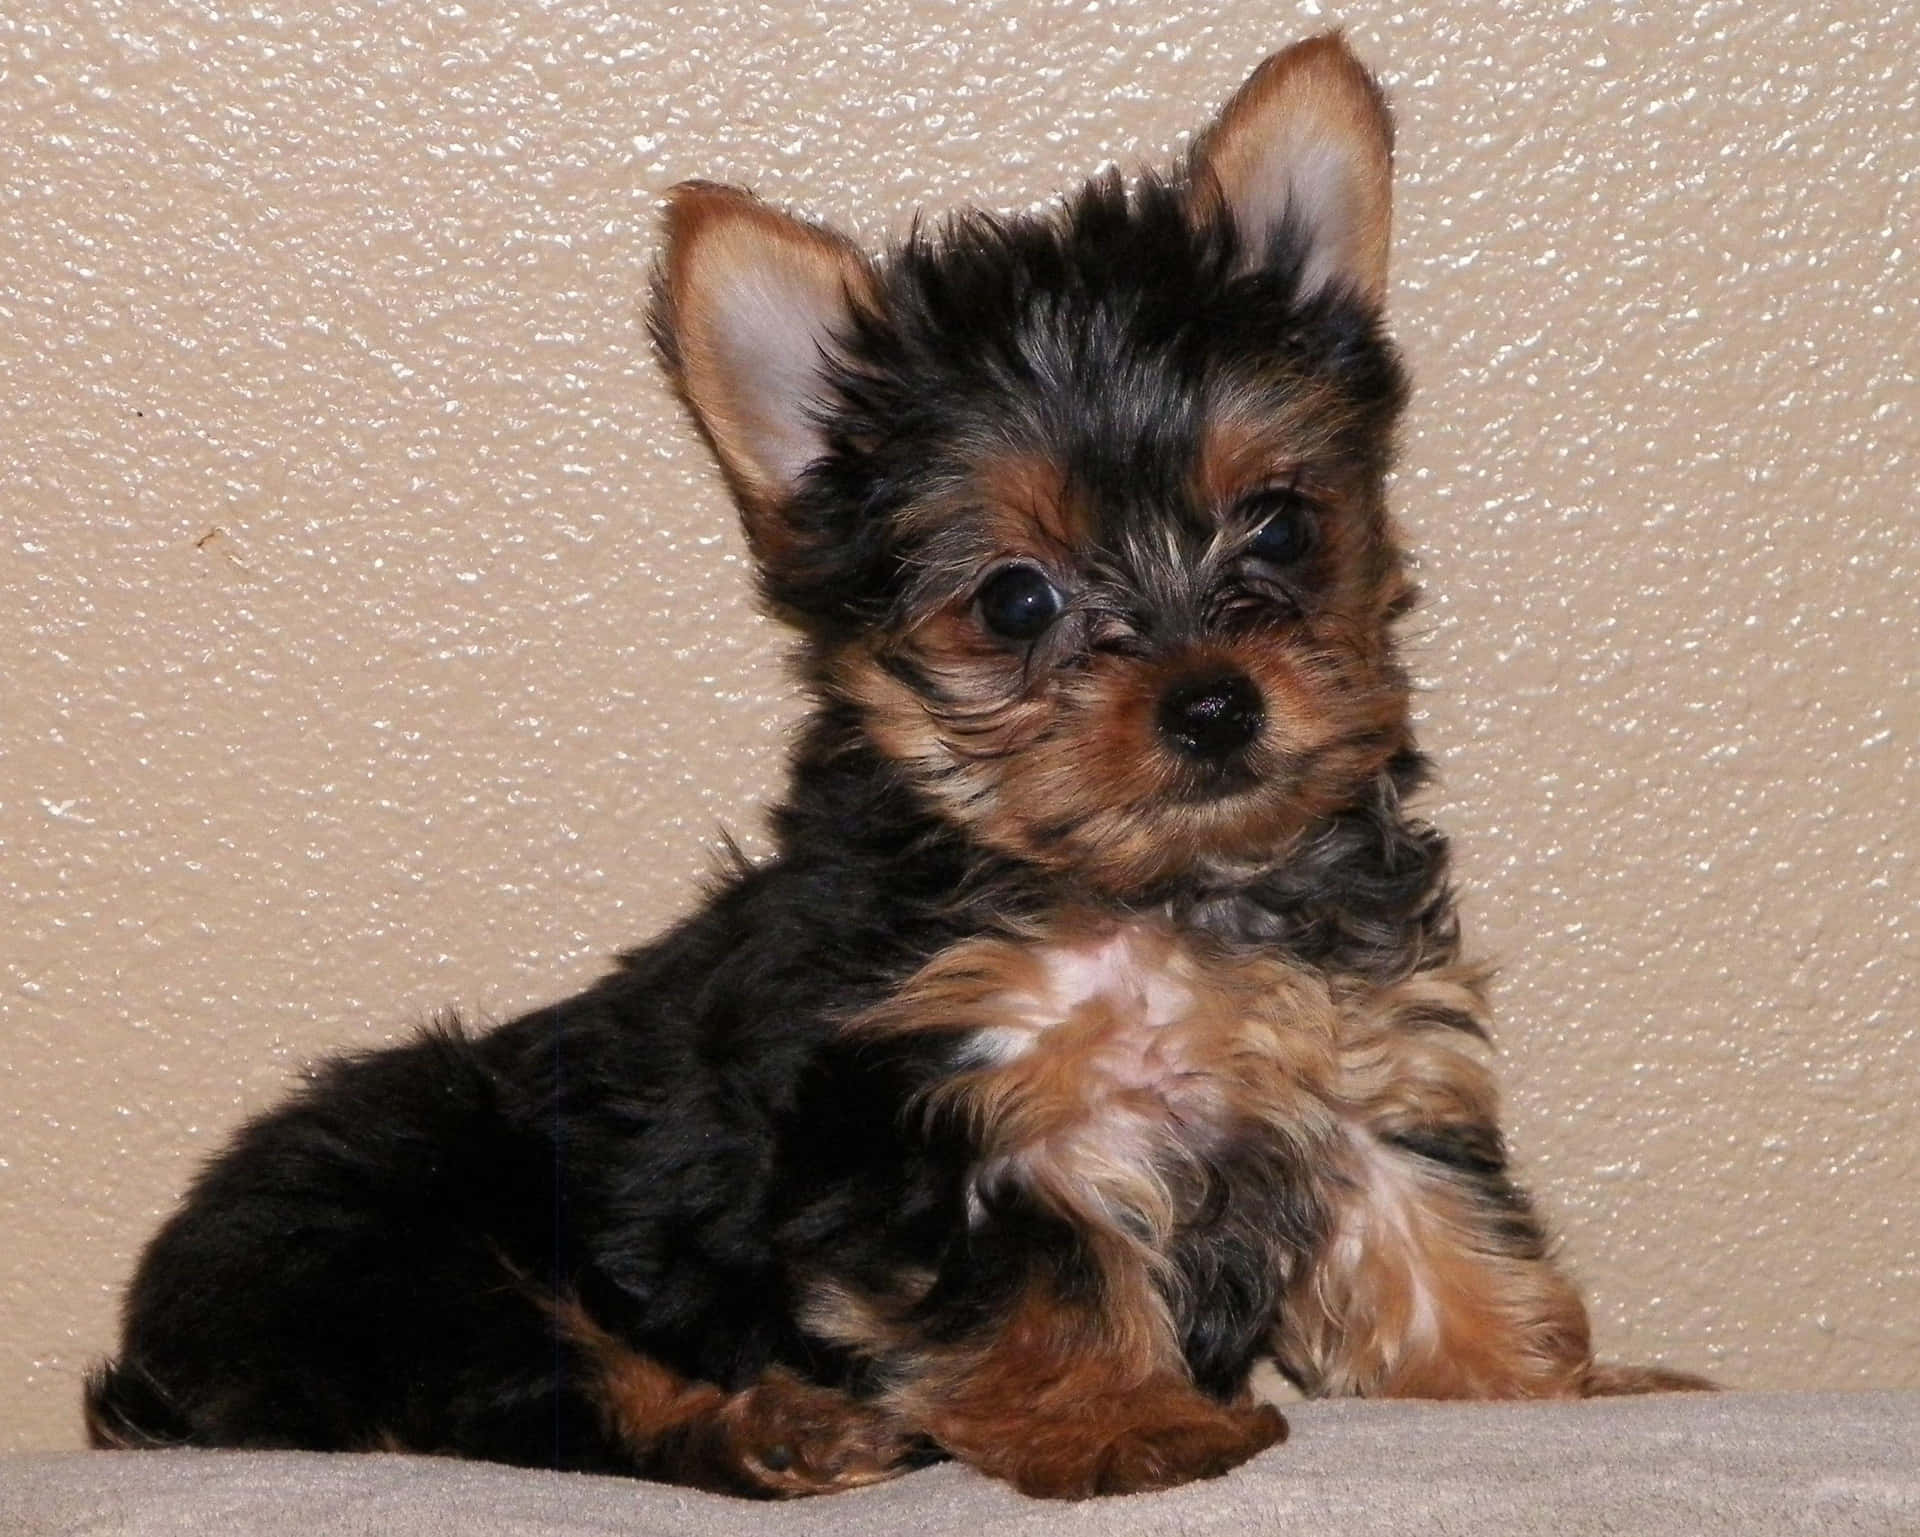 Adorable Yorkie Puppy Sitting On A Blanket